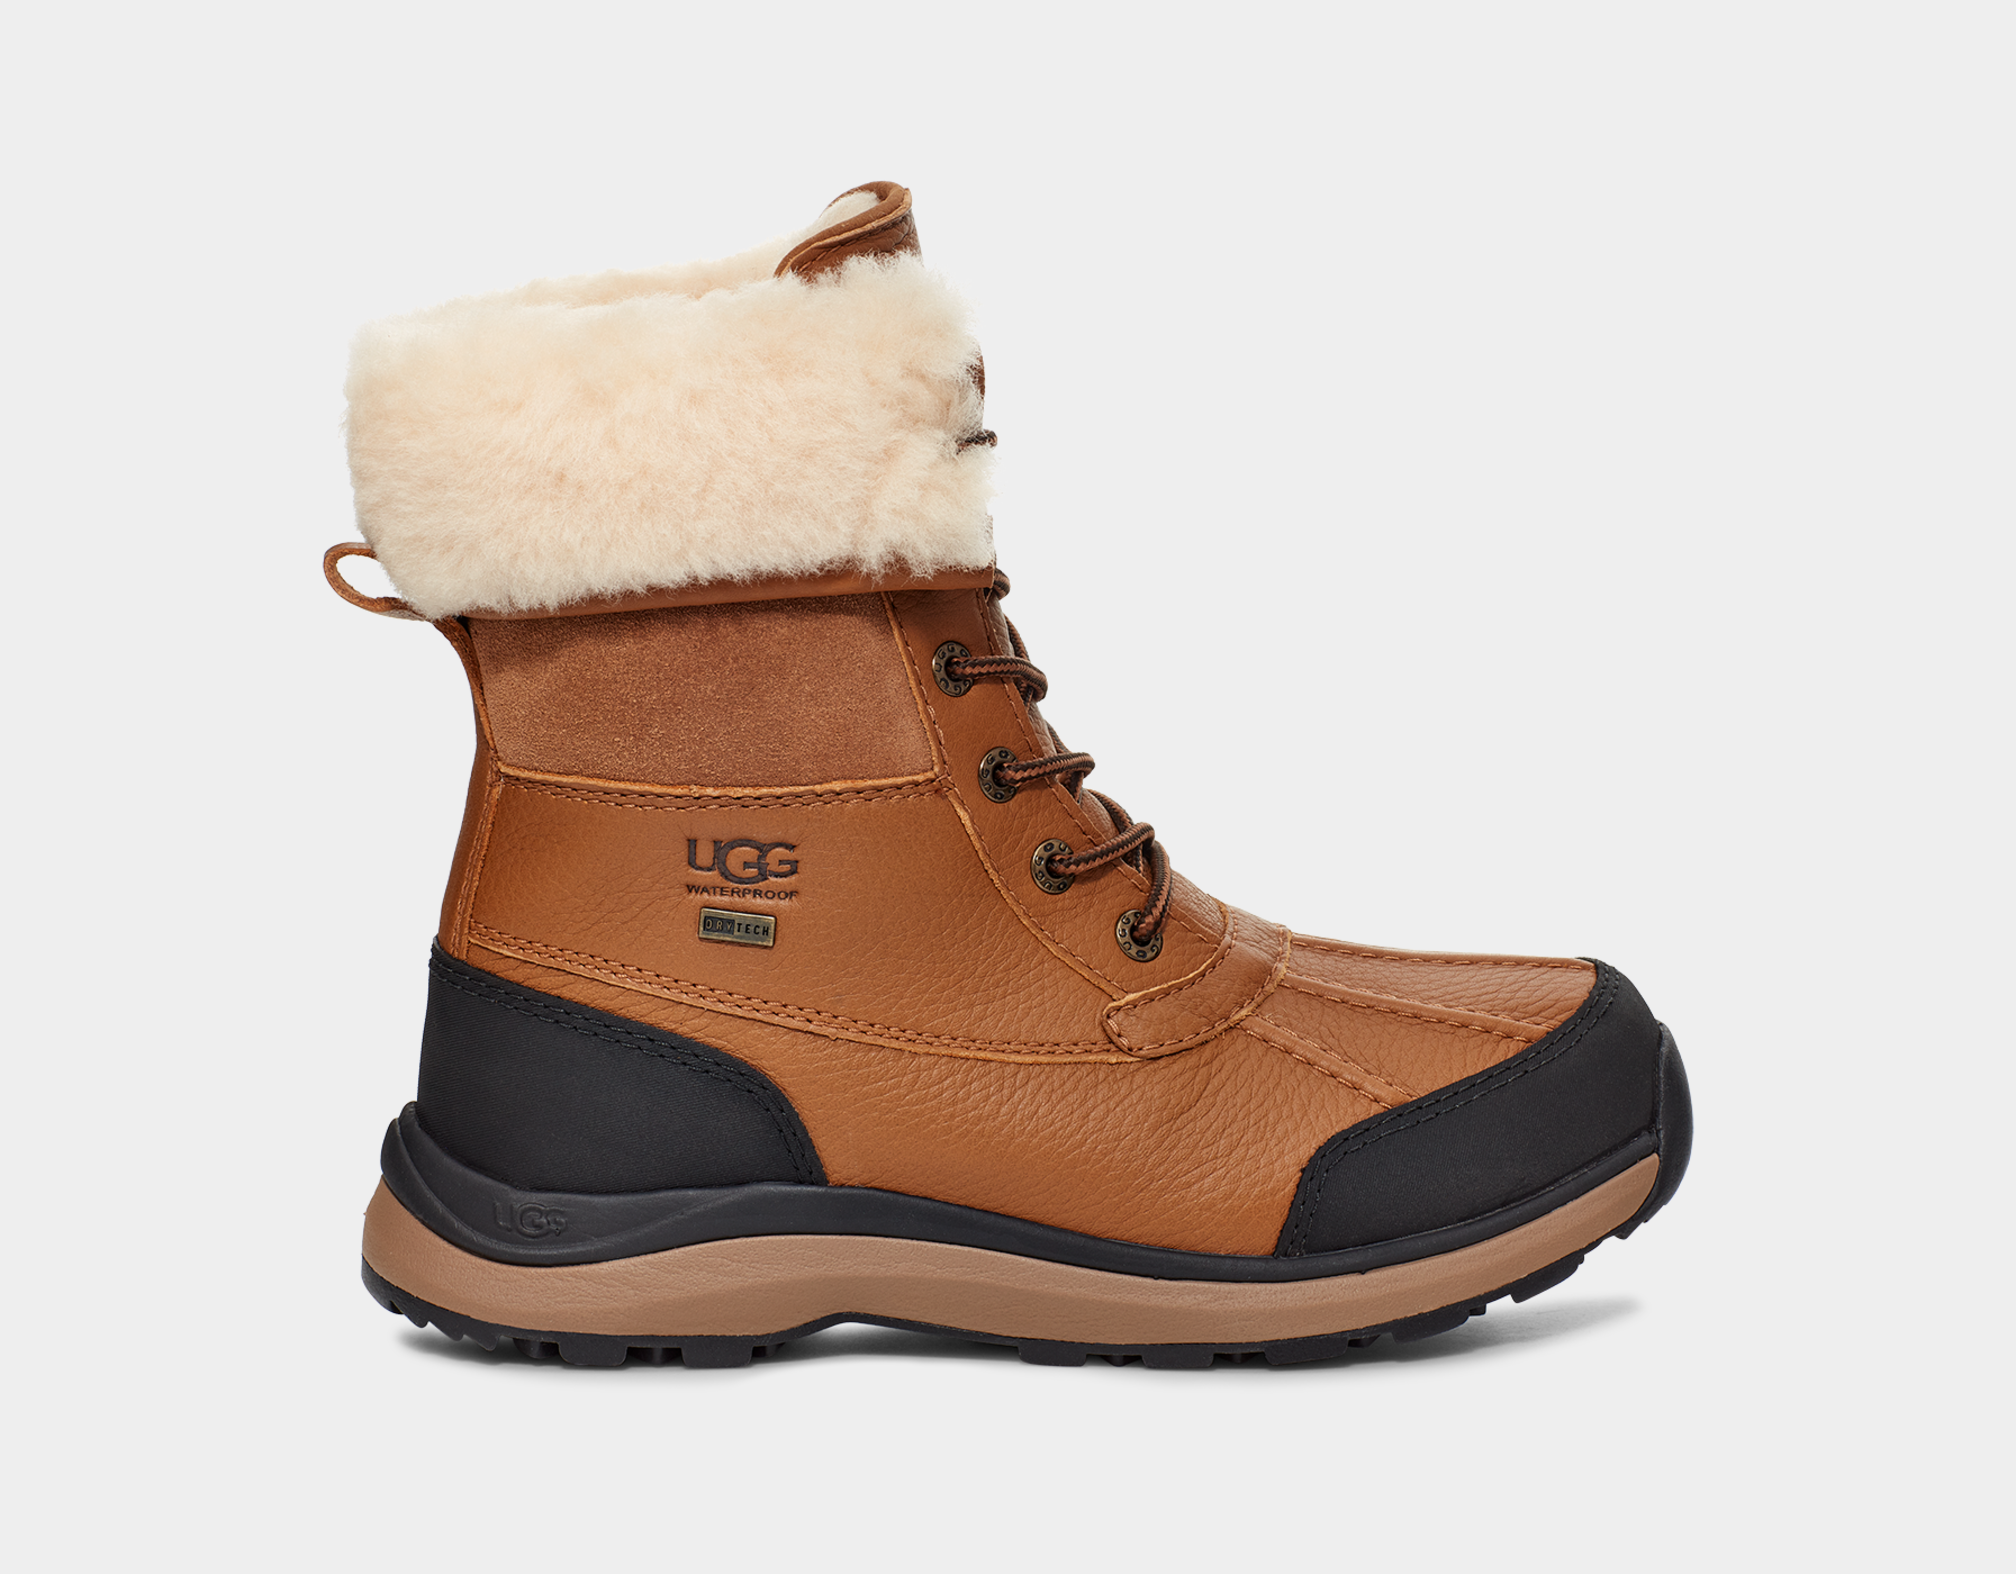 UGG Boots for the Holidays